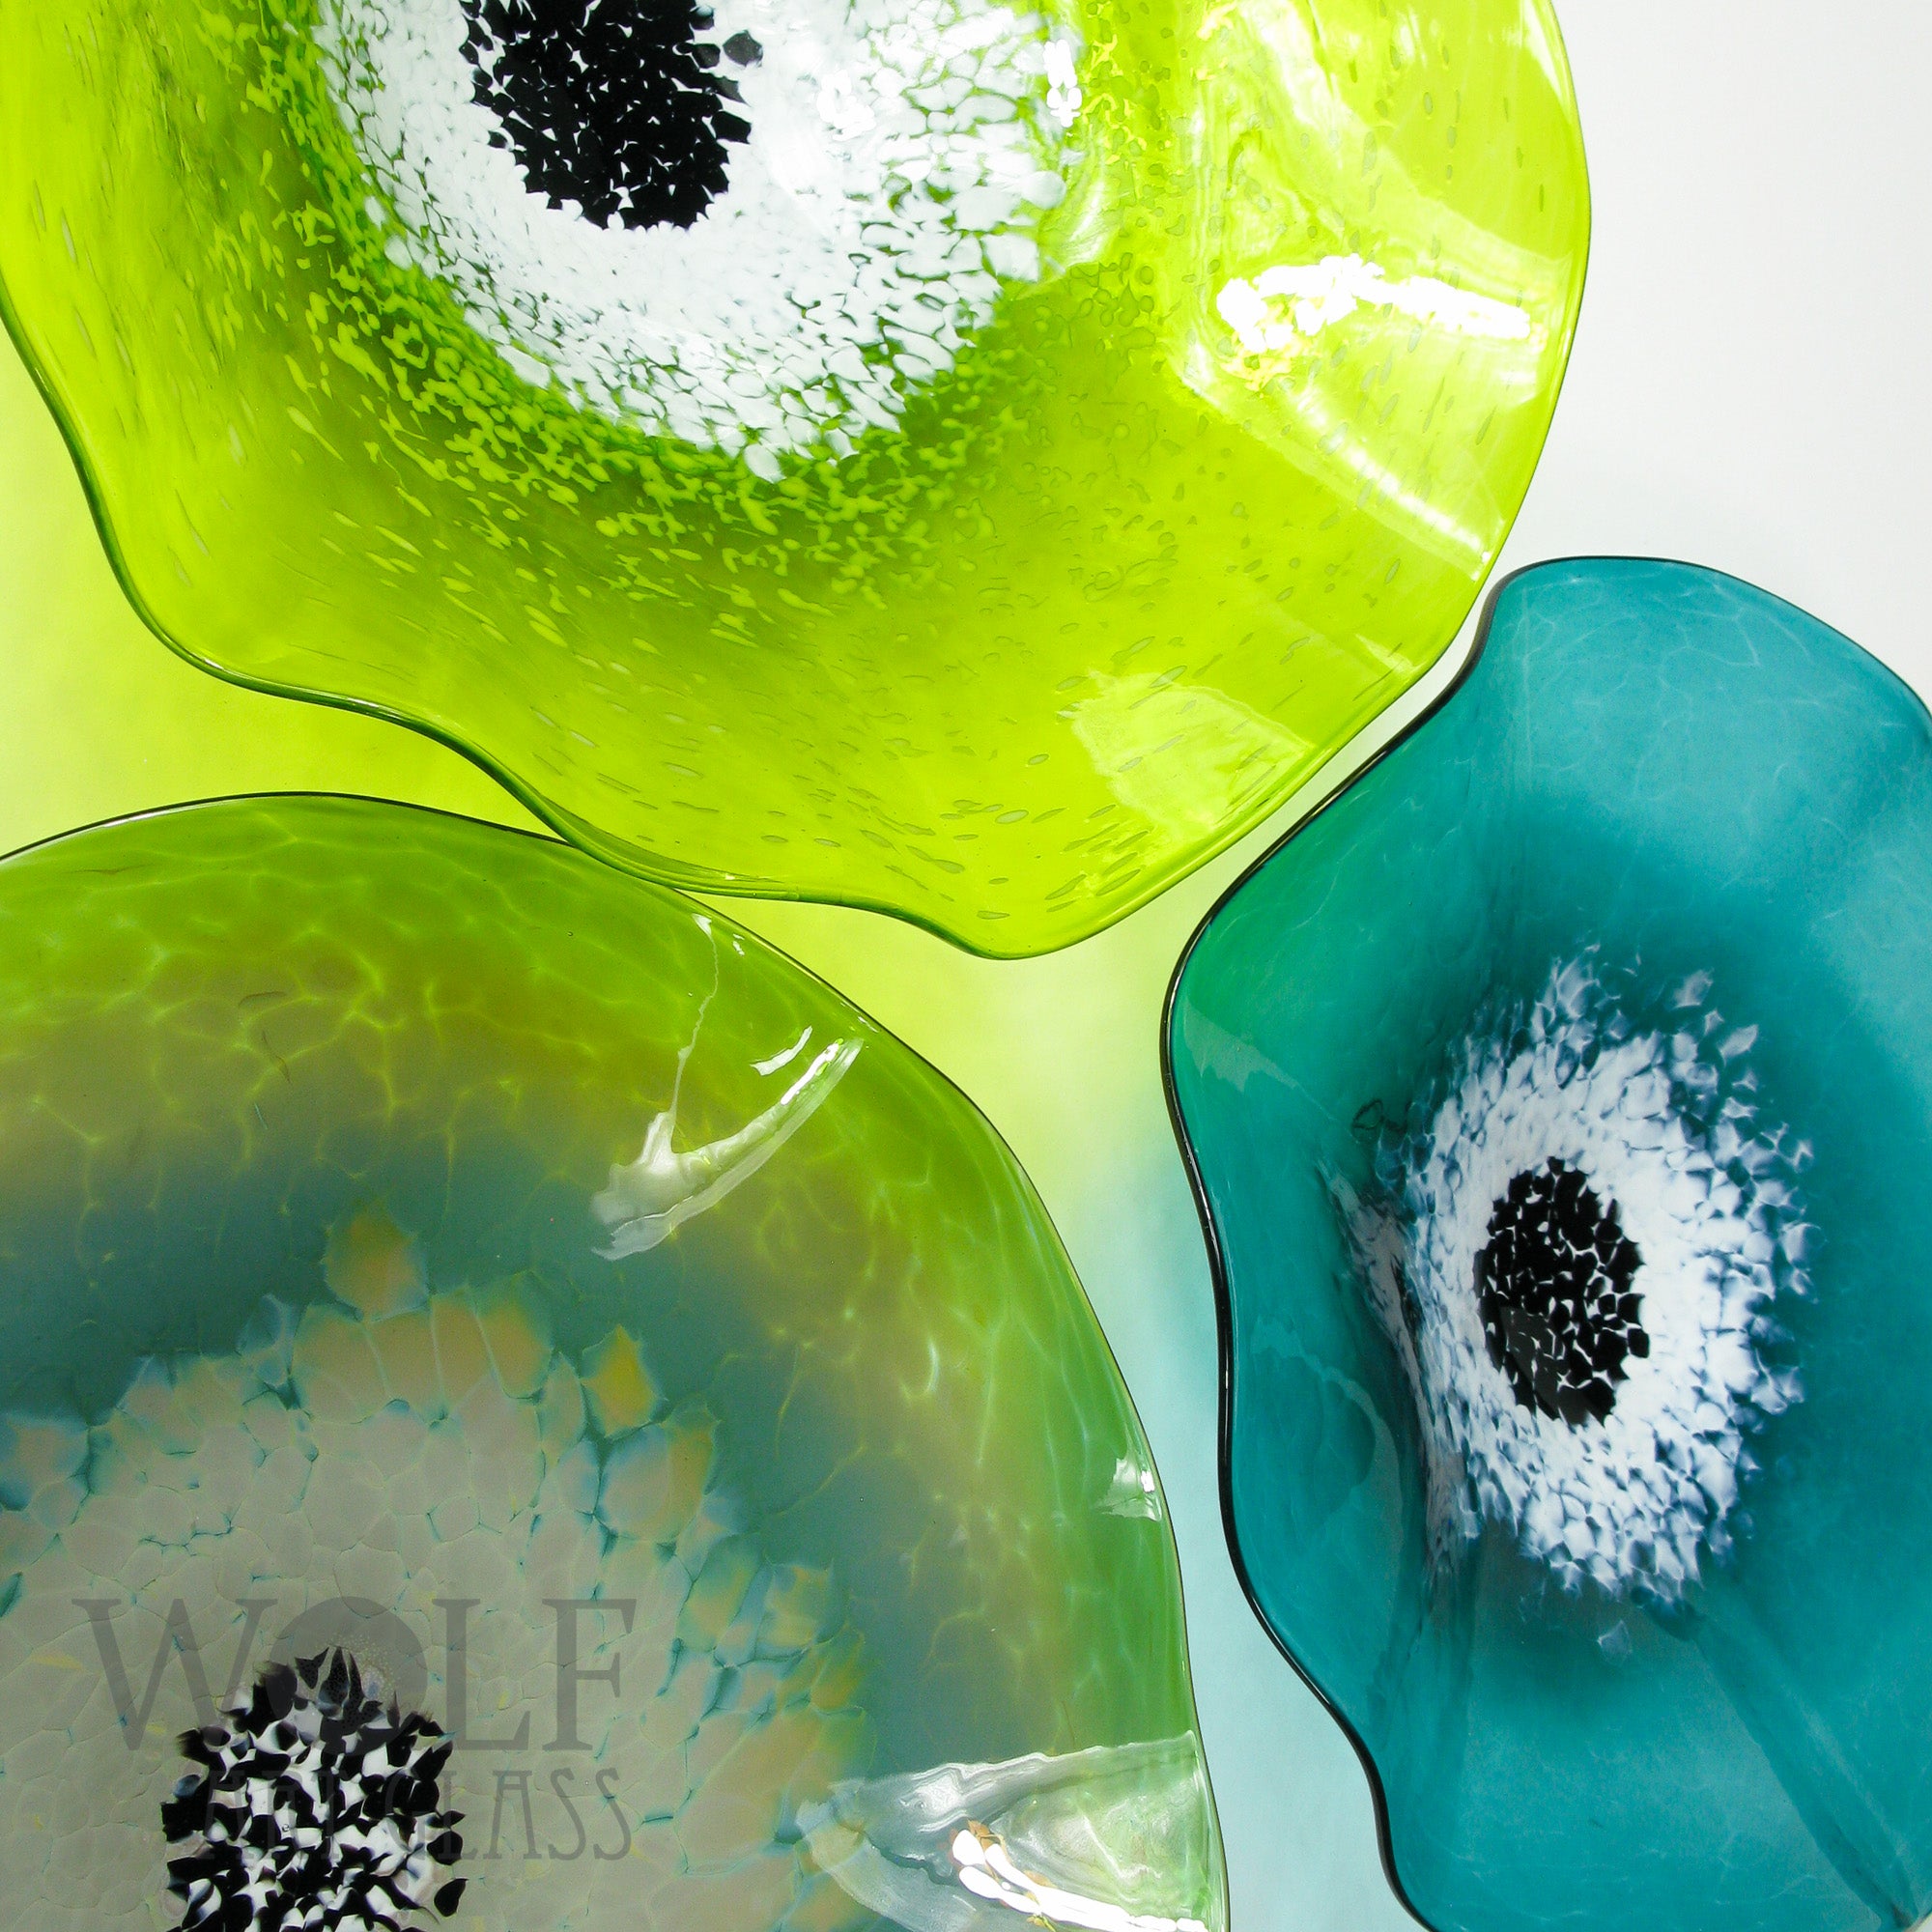 Lime and Teal Green Blown Glass Wall Art Flower Collection Installation Sculpture